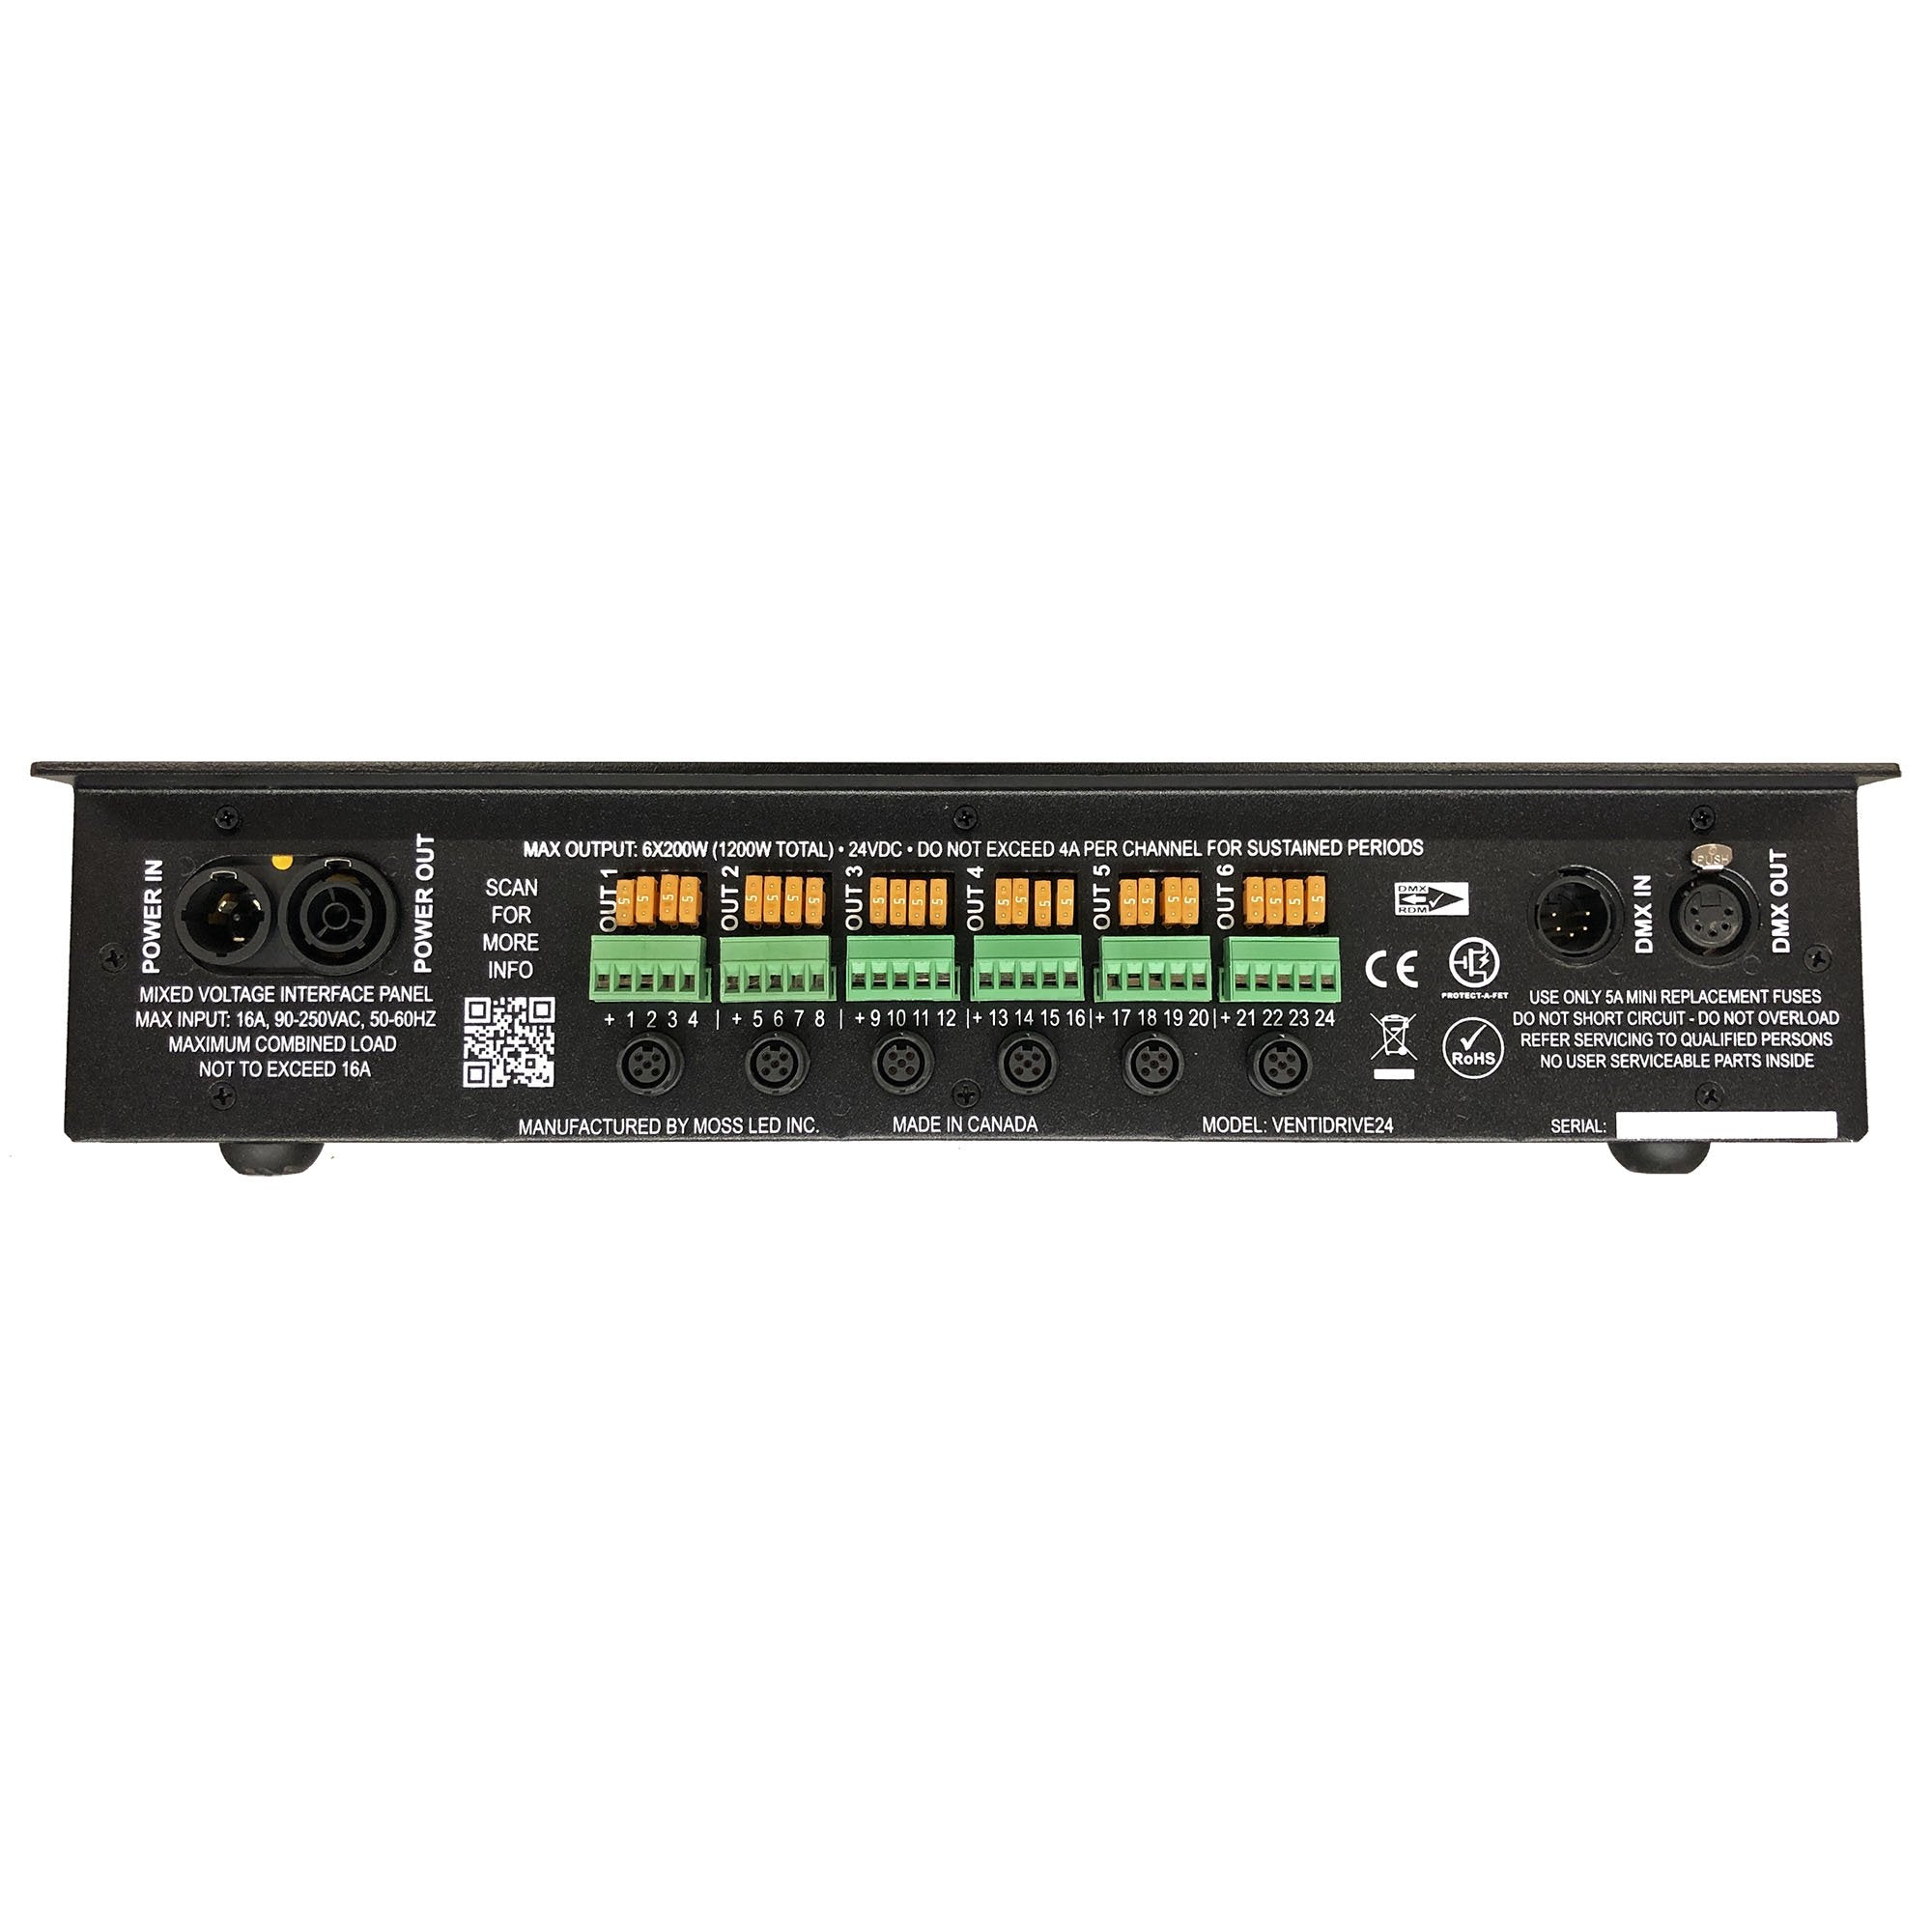 VentiDrive - 24 Channel Dimmer